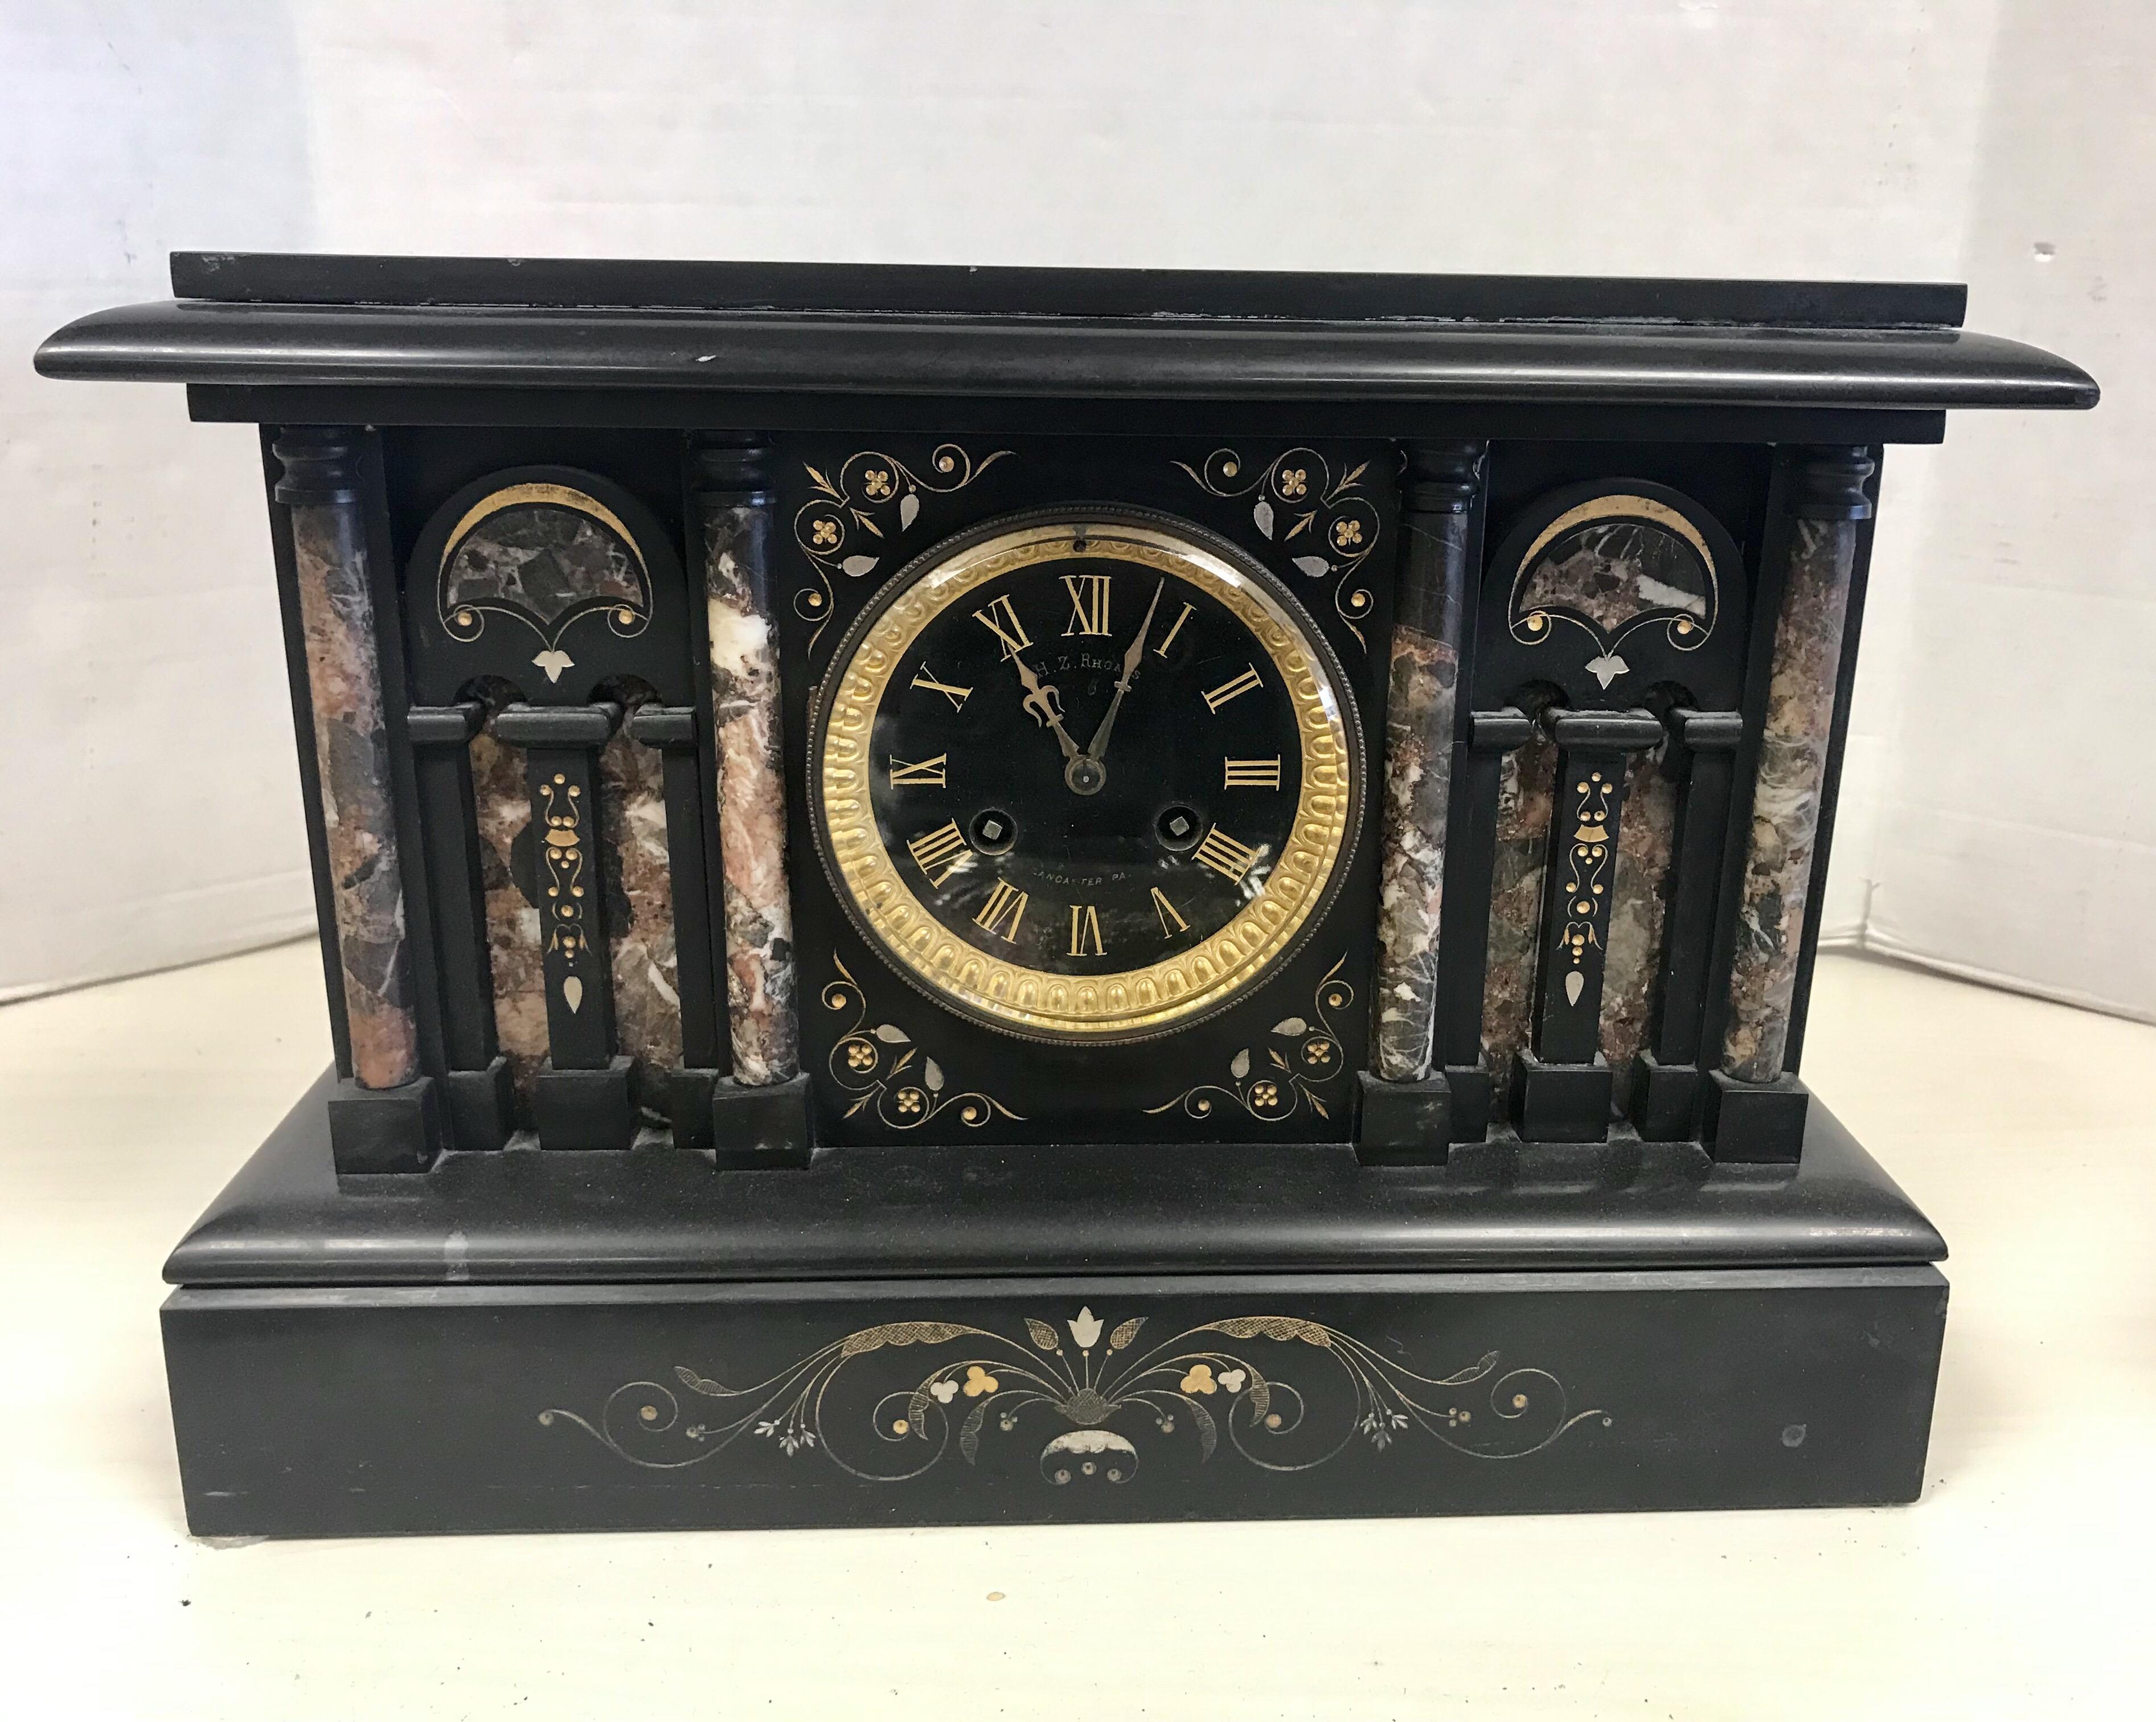 Antique, very heavy, black marble Victorian style key wind clock with inlay. Comes with key-wind key.
Appears to work but we are not clock experts. Weight is approximately 80 pounds.